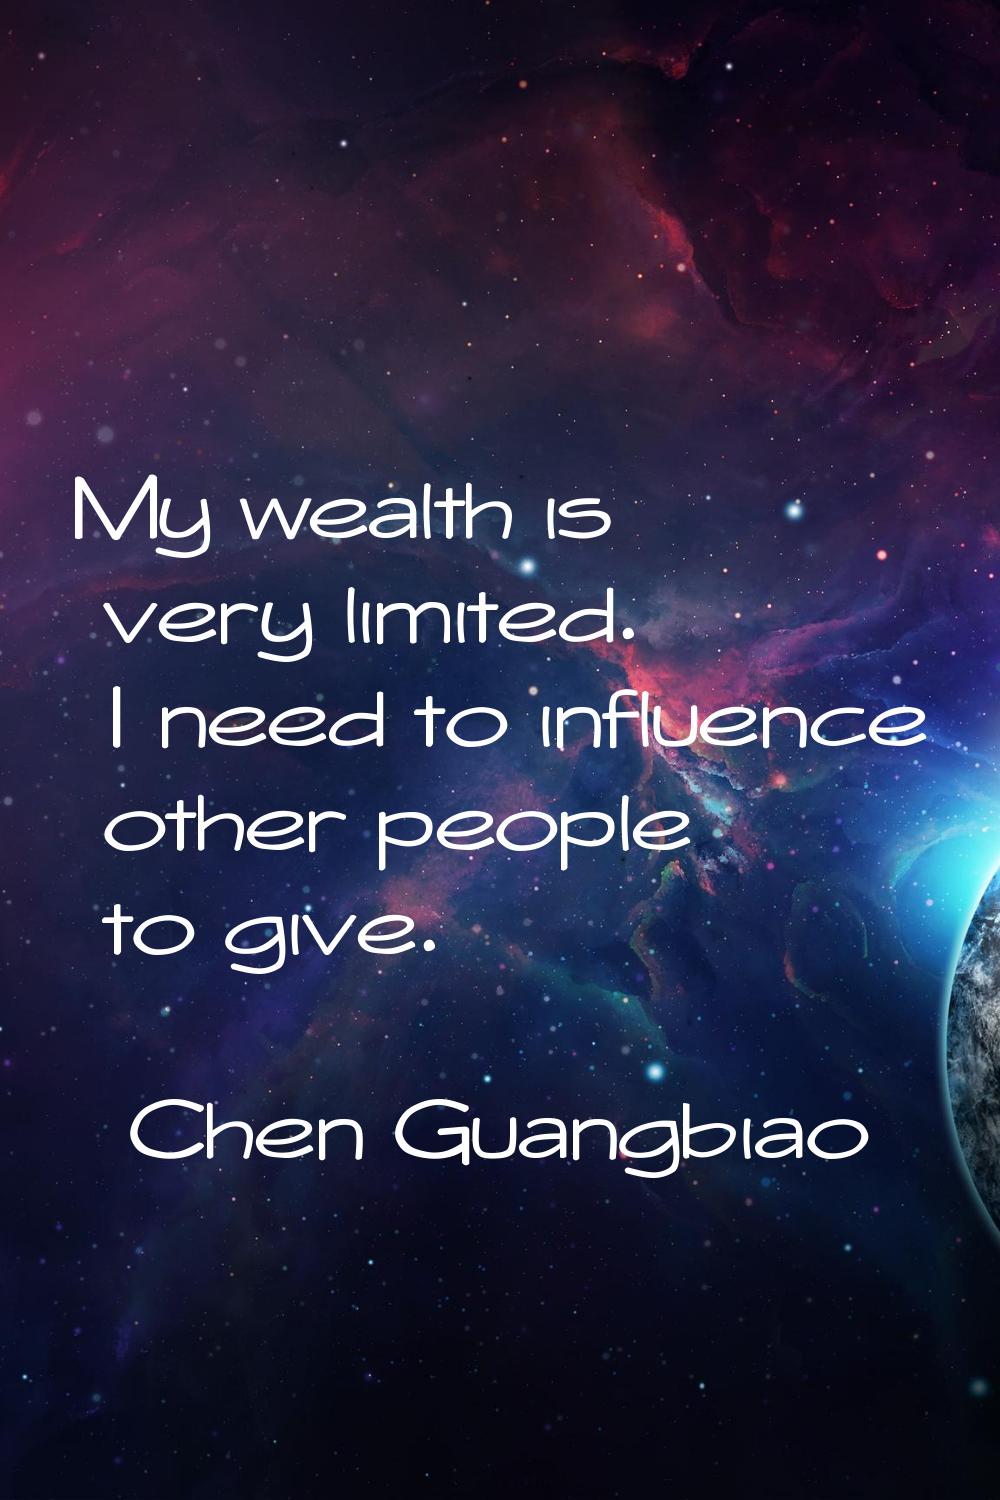 My wealth is very limited. I need to influence other people to give.